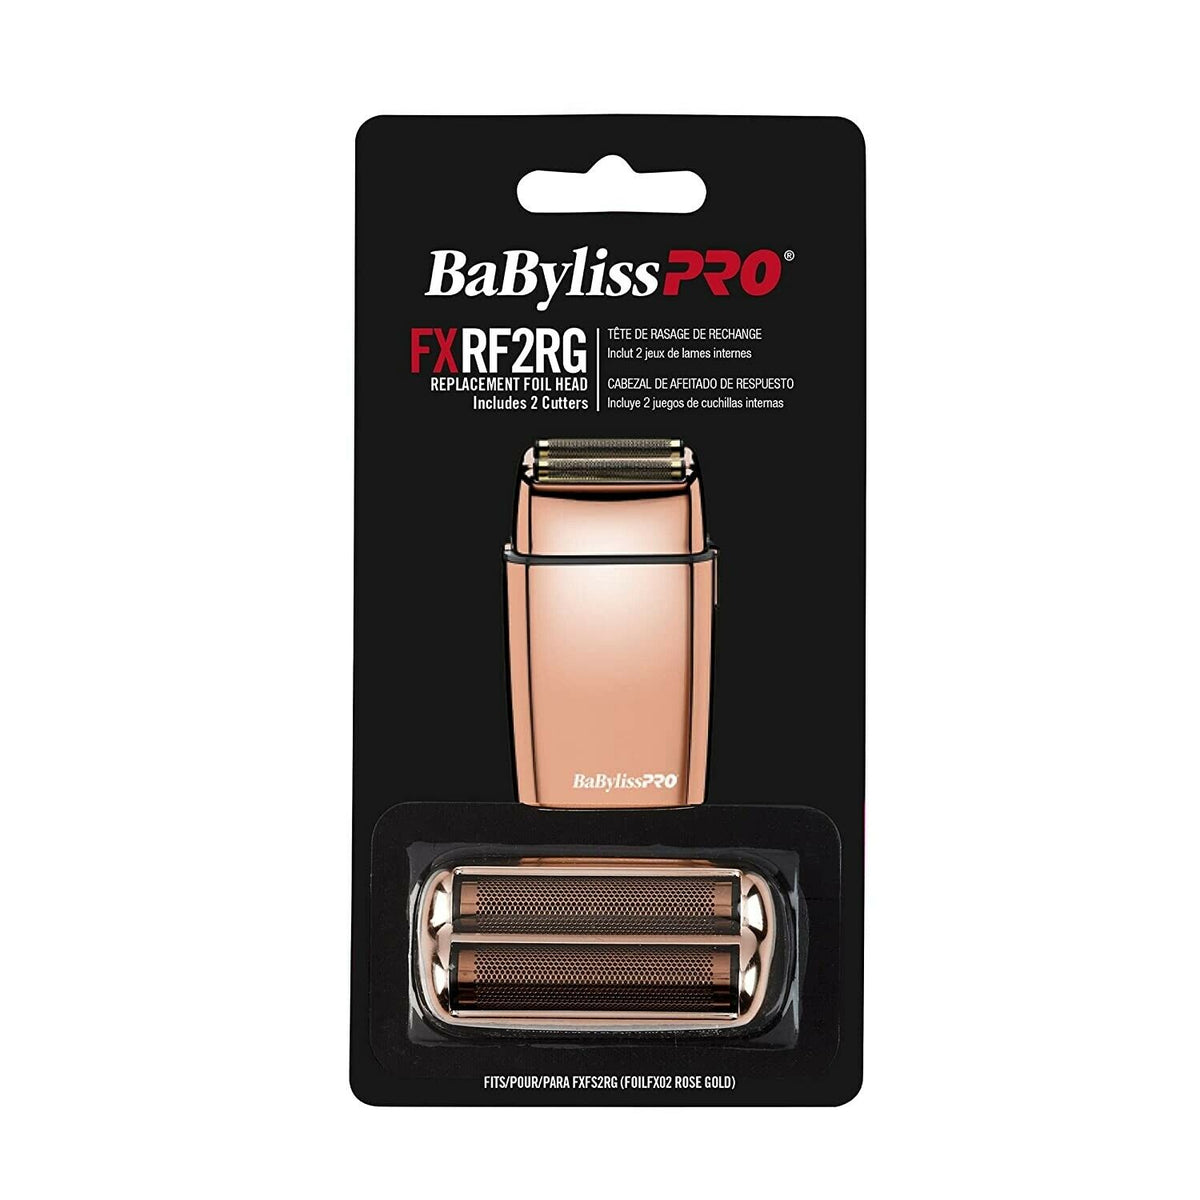 New Babyliss PRO Rosegold, Gold Clippers & Shavers will be available at an  amazing price at the Power Fading Hair Show…